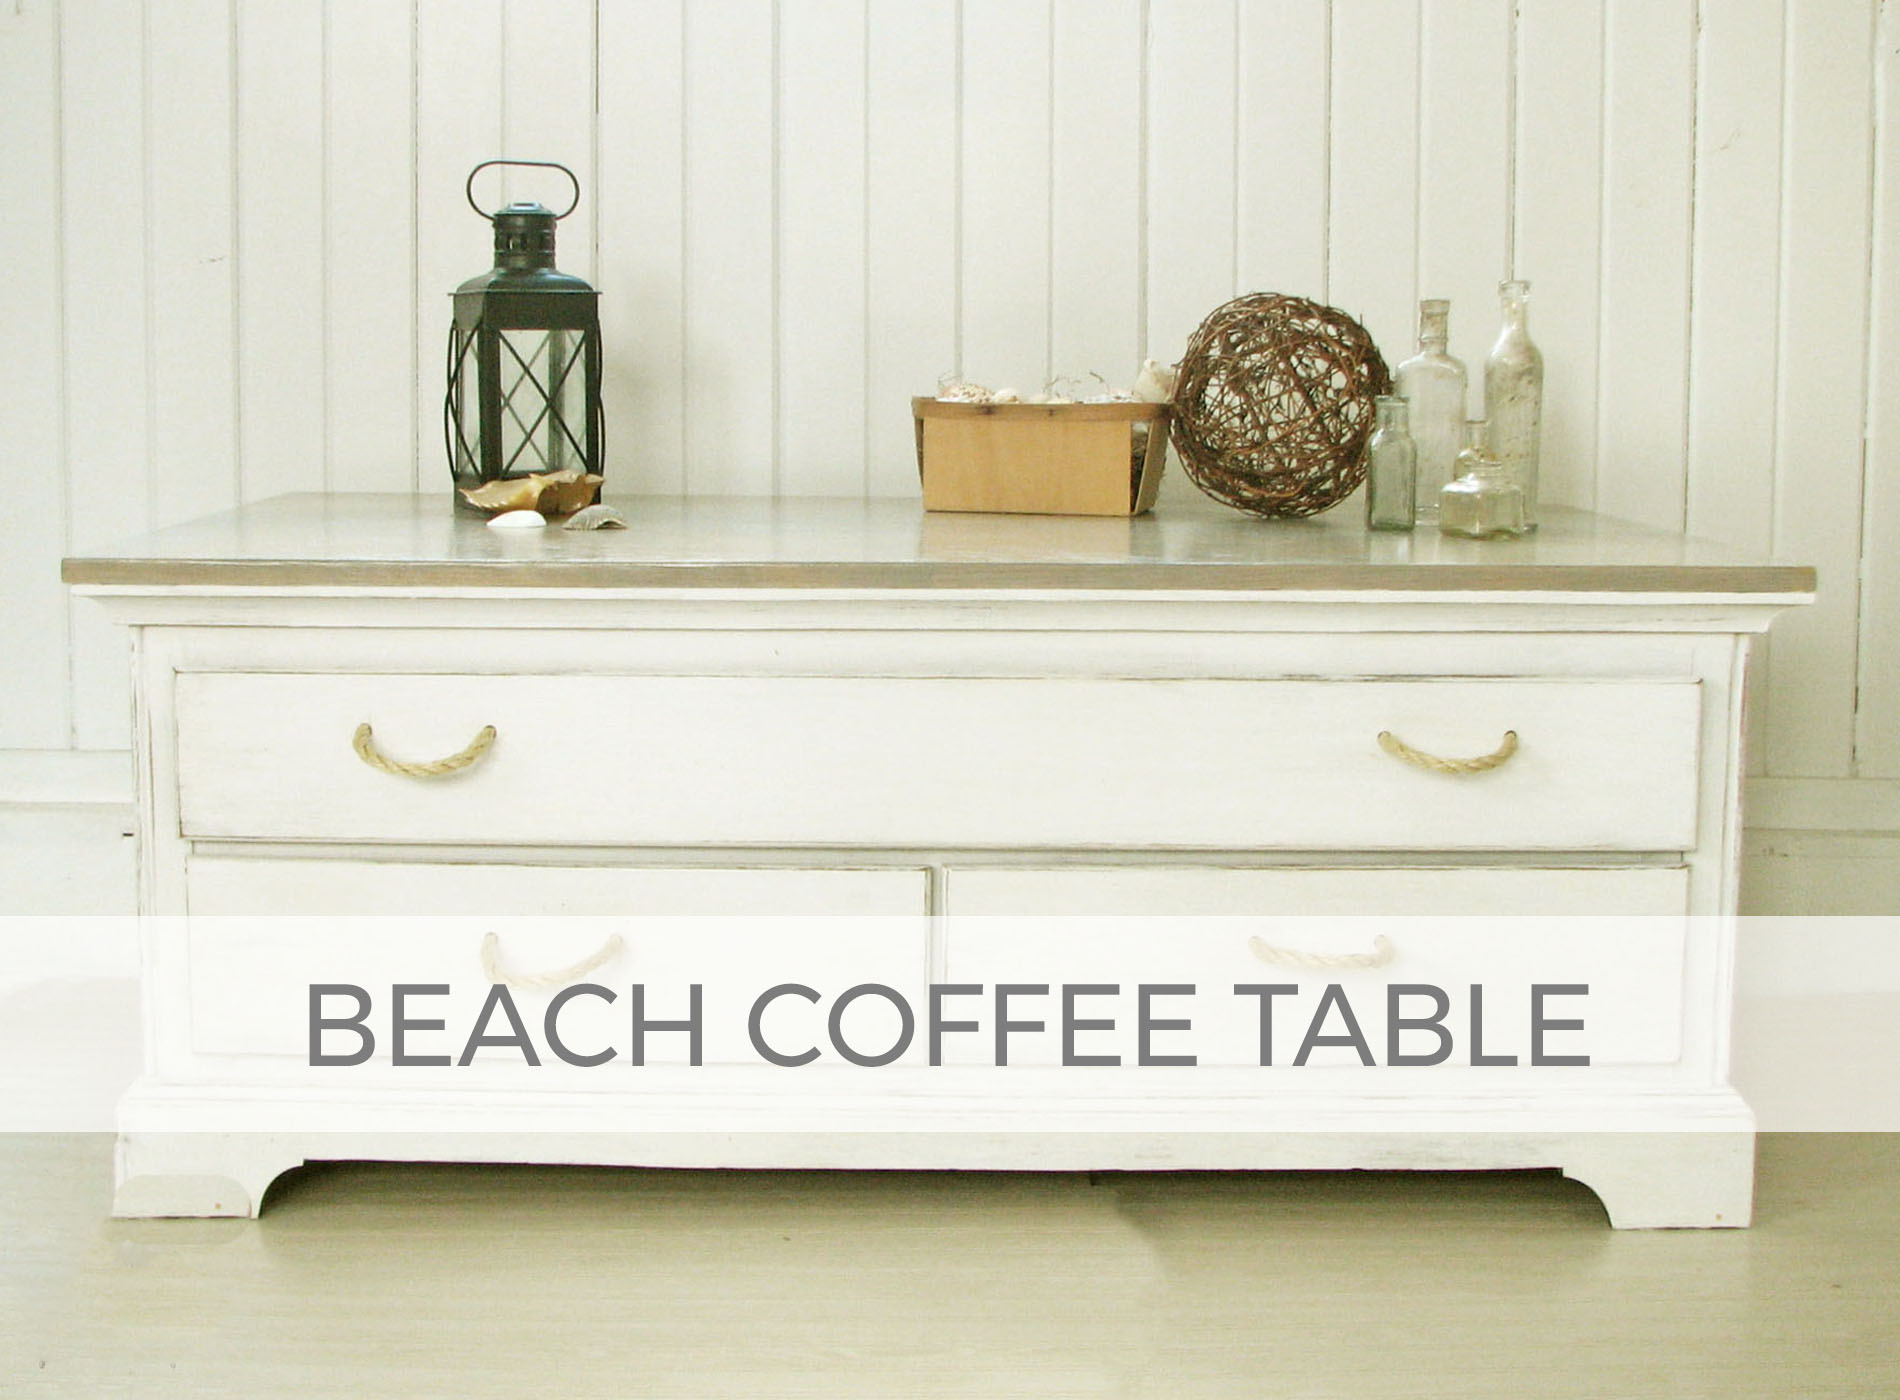 Beach Coffee Table by Larissa of Prodigal Pieces | prodigalpieces.com